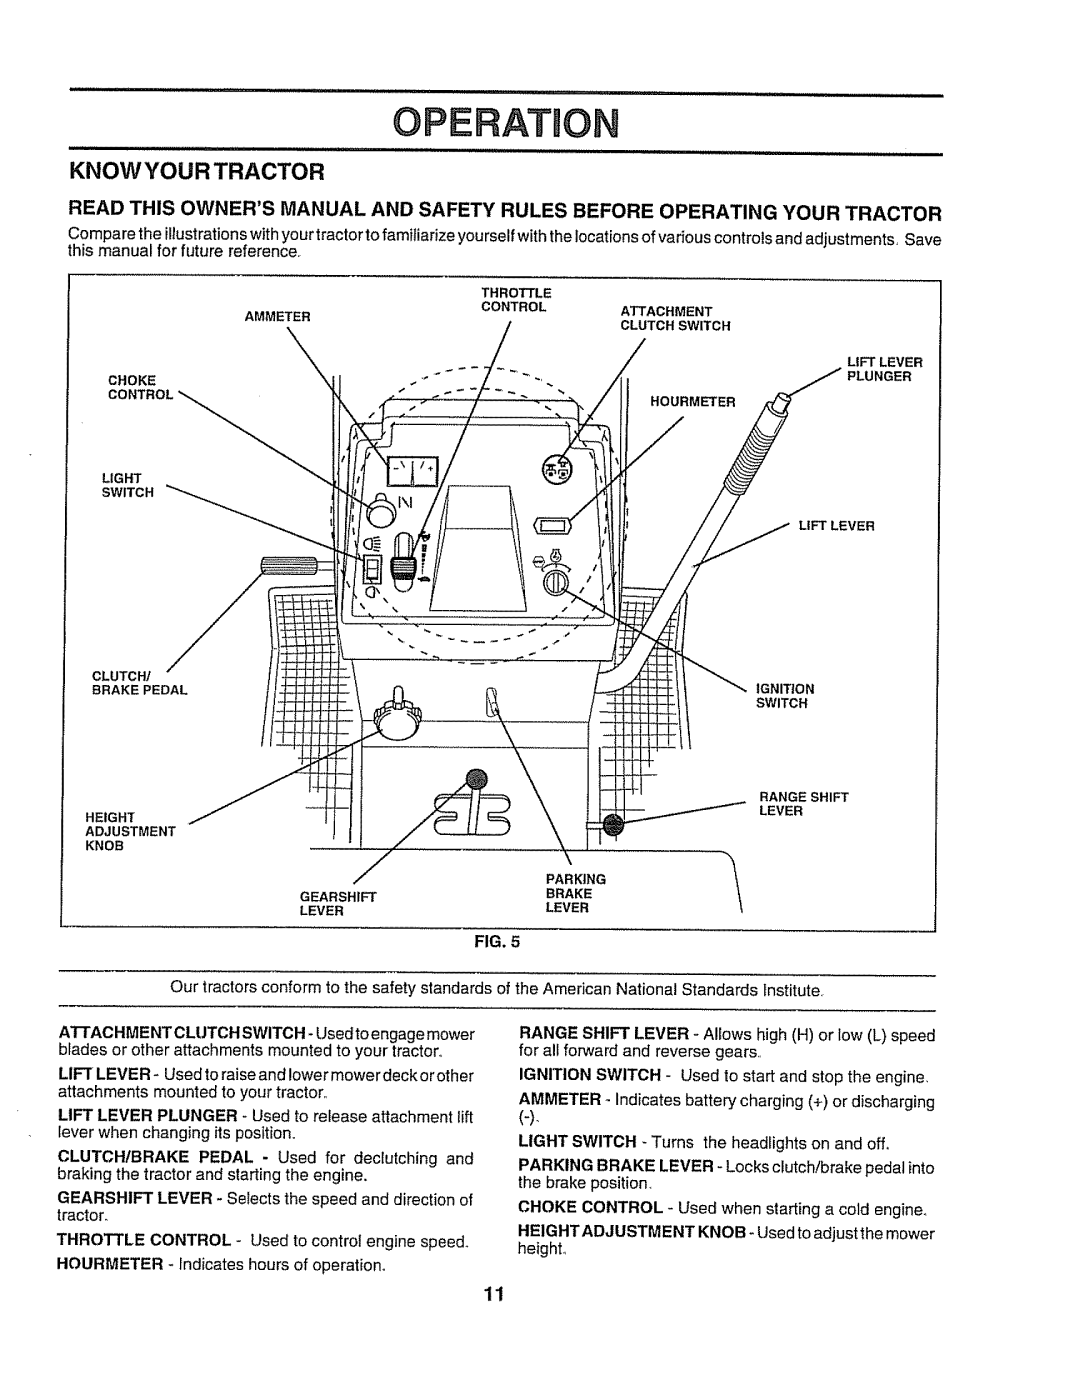 Craftsman 917O251550 owner manual Operation, Knowyourtractor 